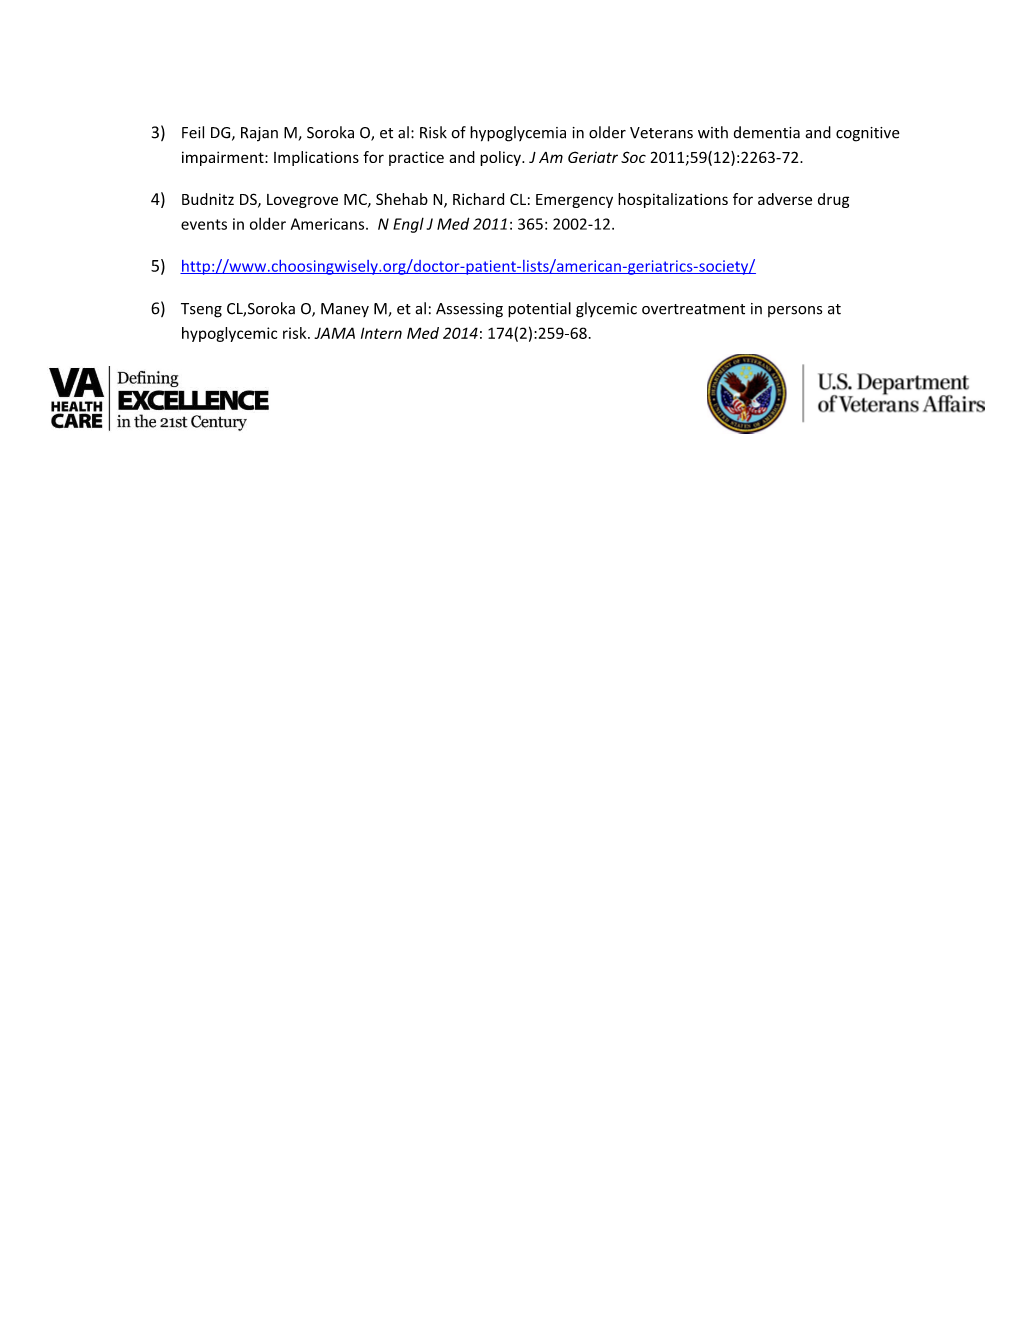 Hypoglycemia Safety Initiative: Brief Statement for VA Clinicians